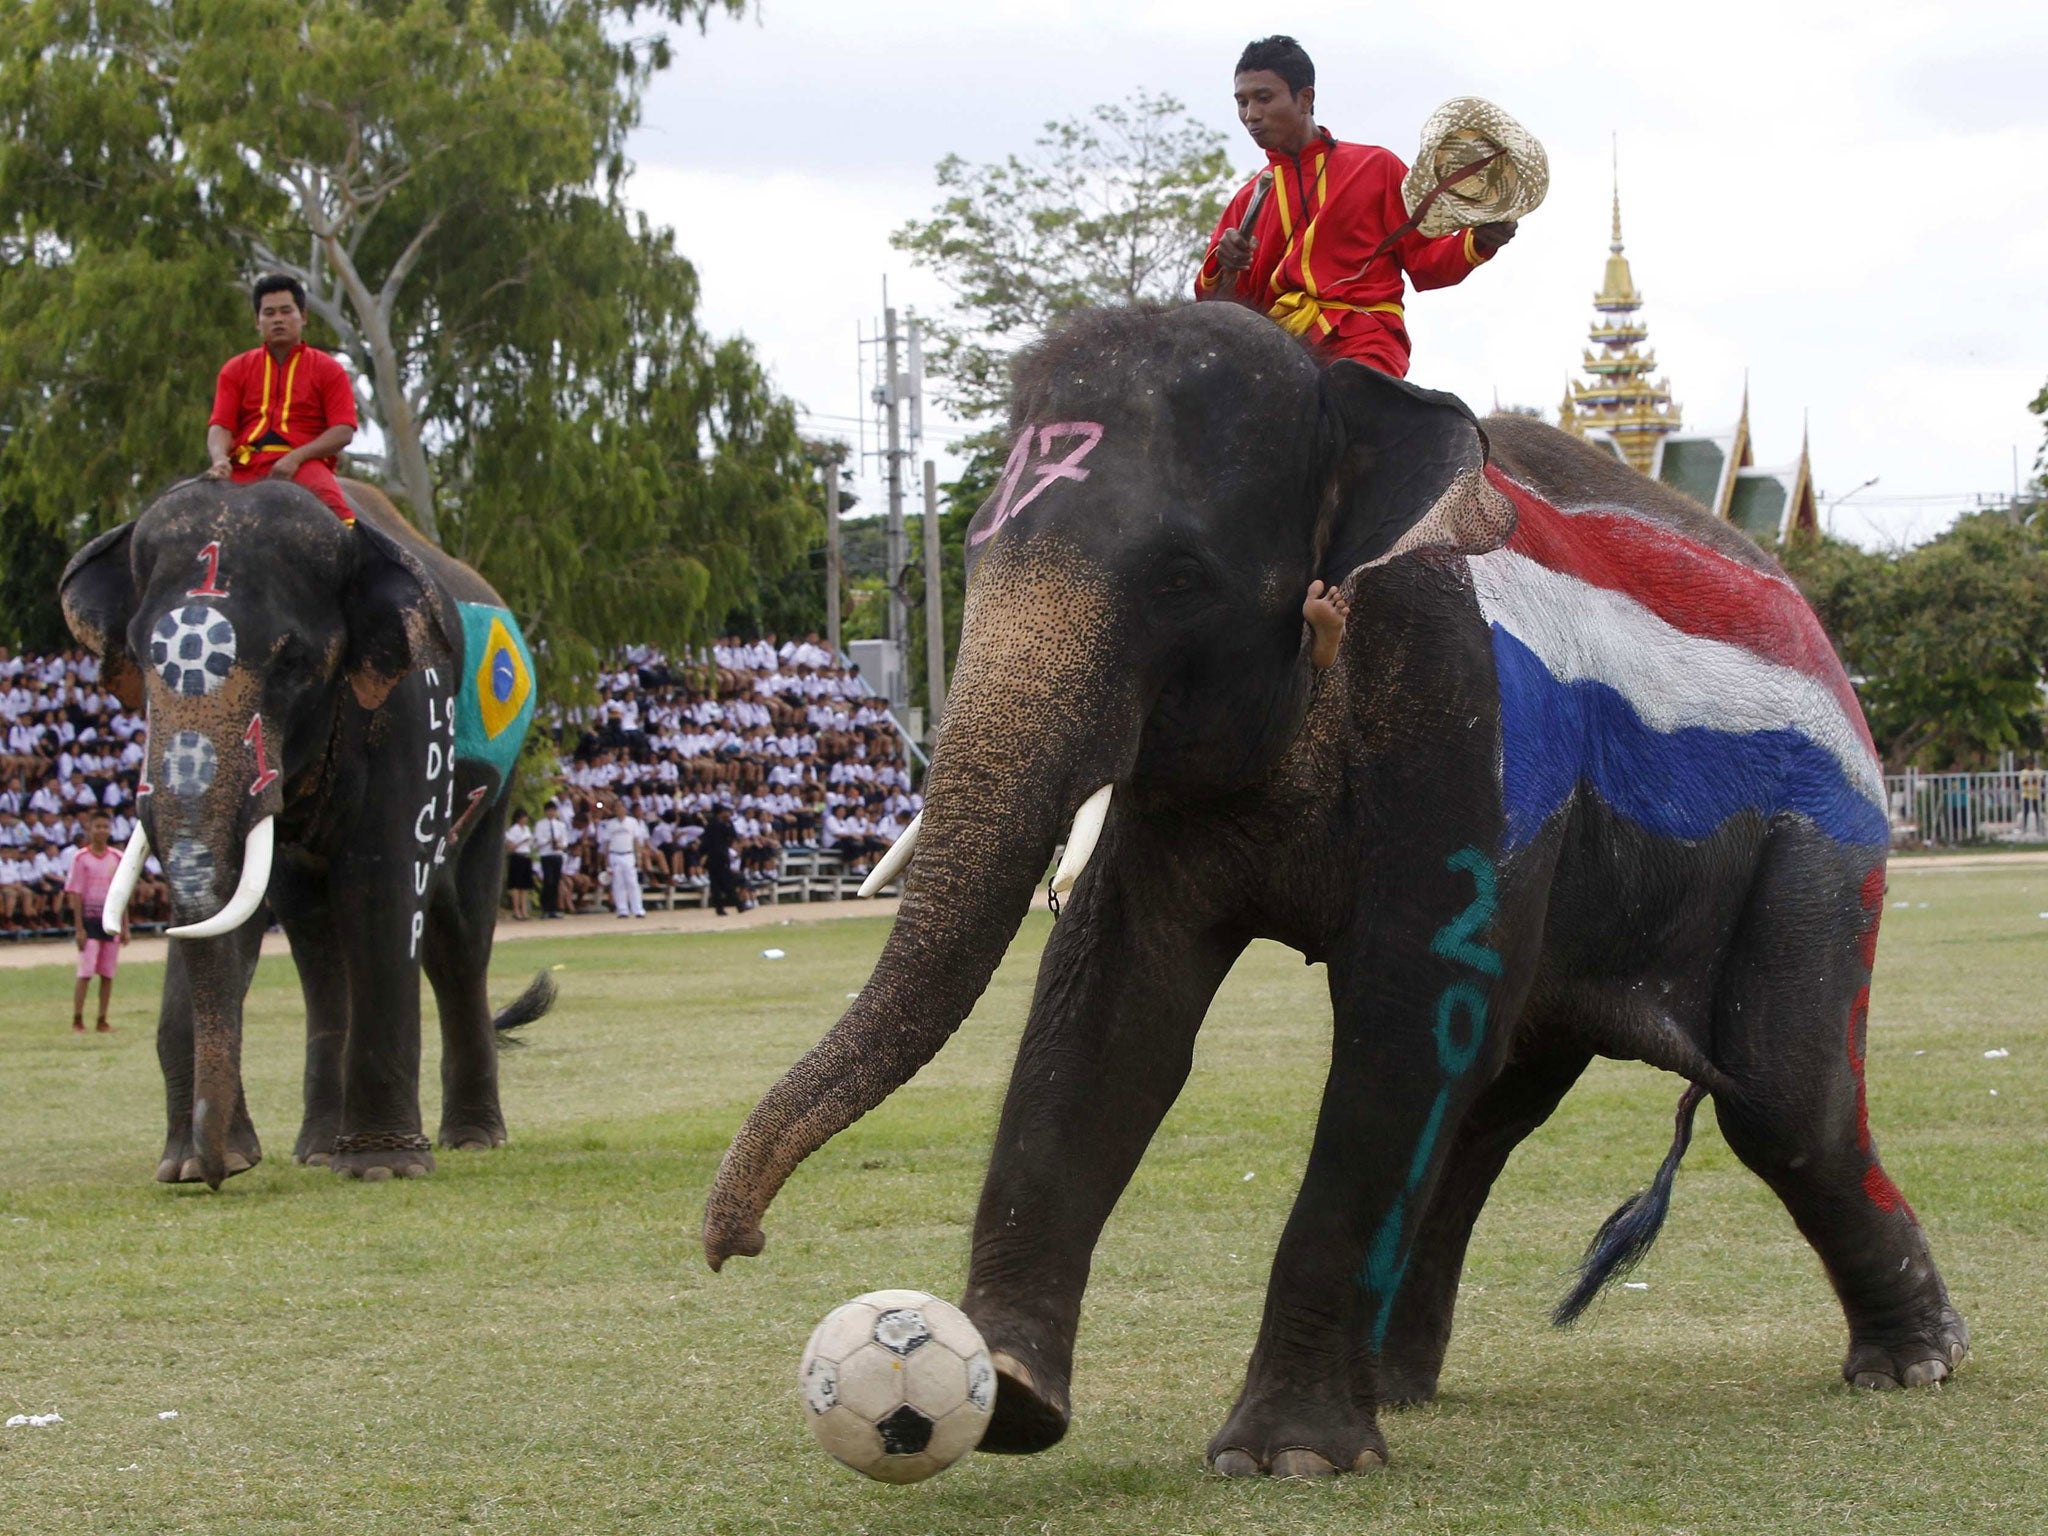 An elephant kicks a ball during a soccer match with Thai students in Thailand's Ayutthaya province